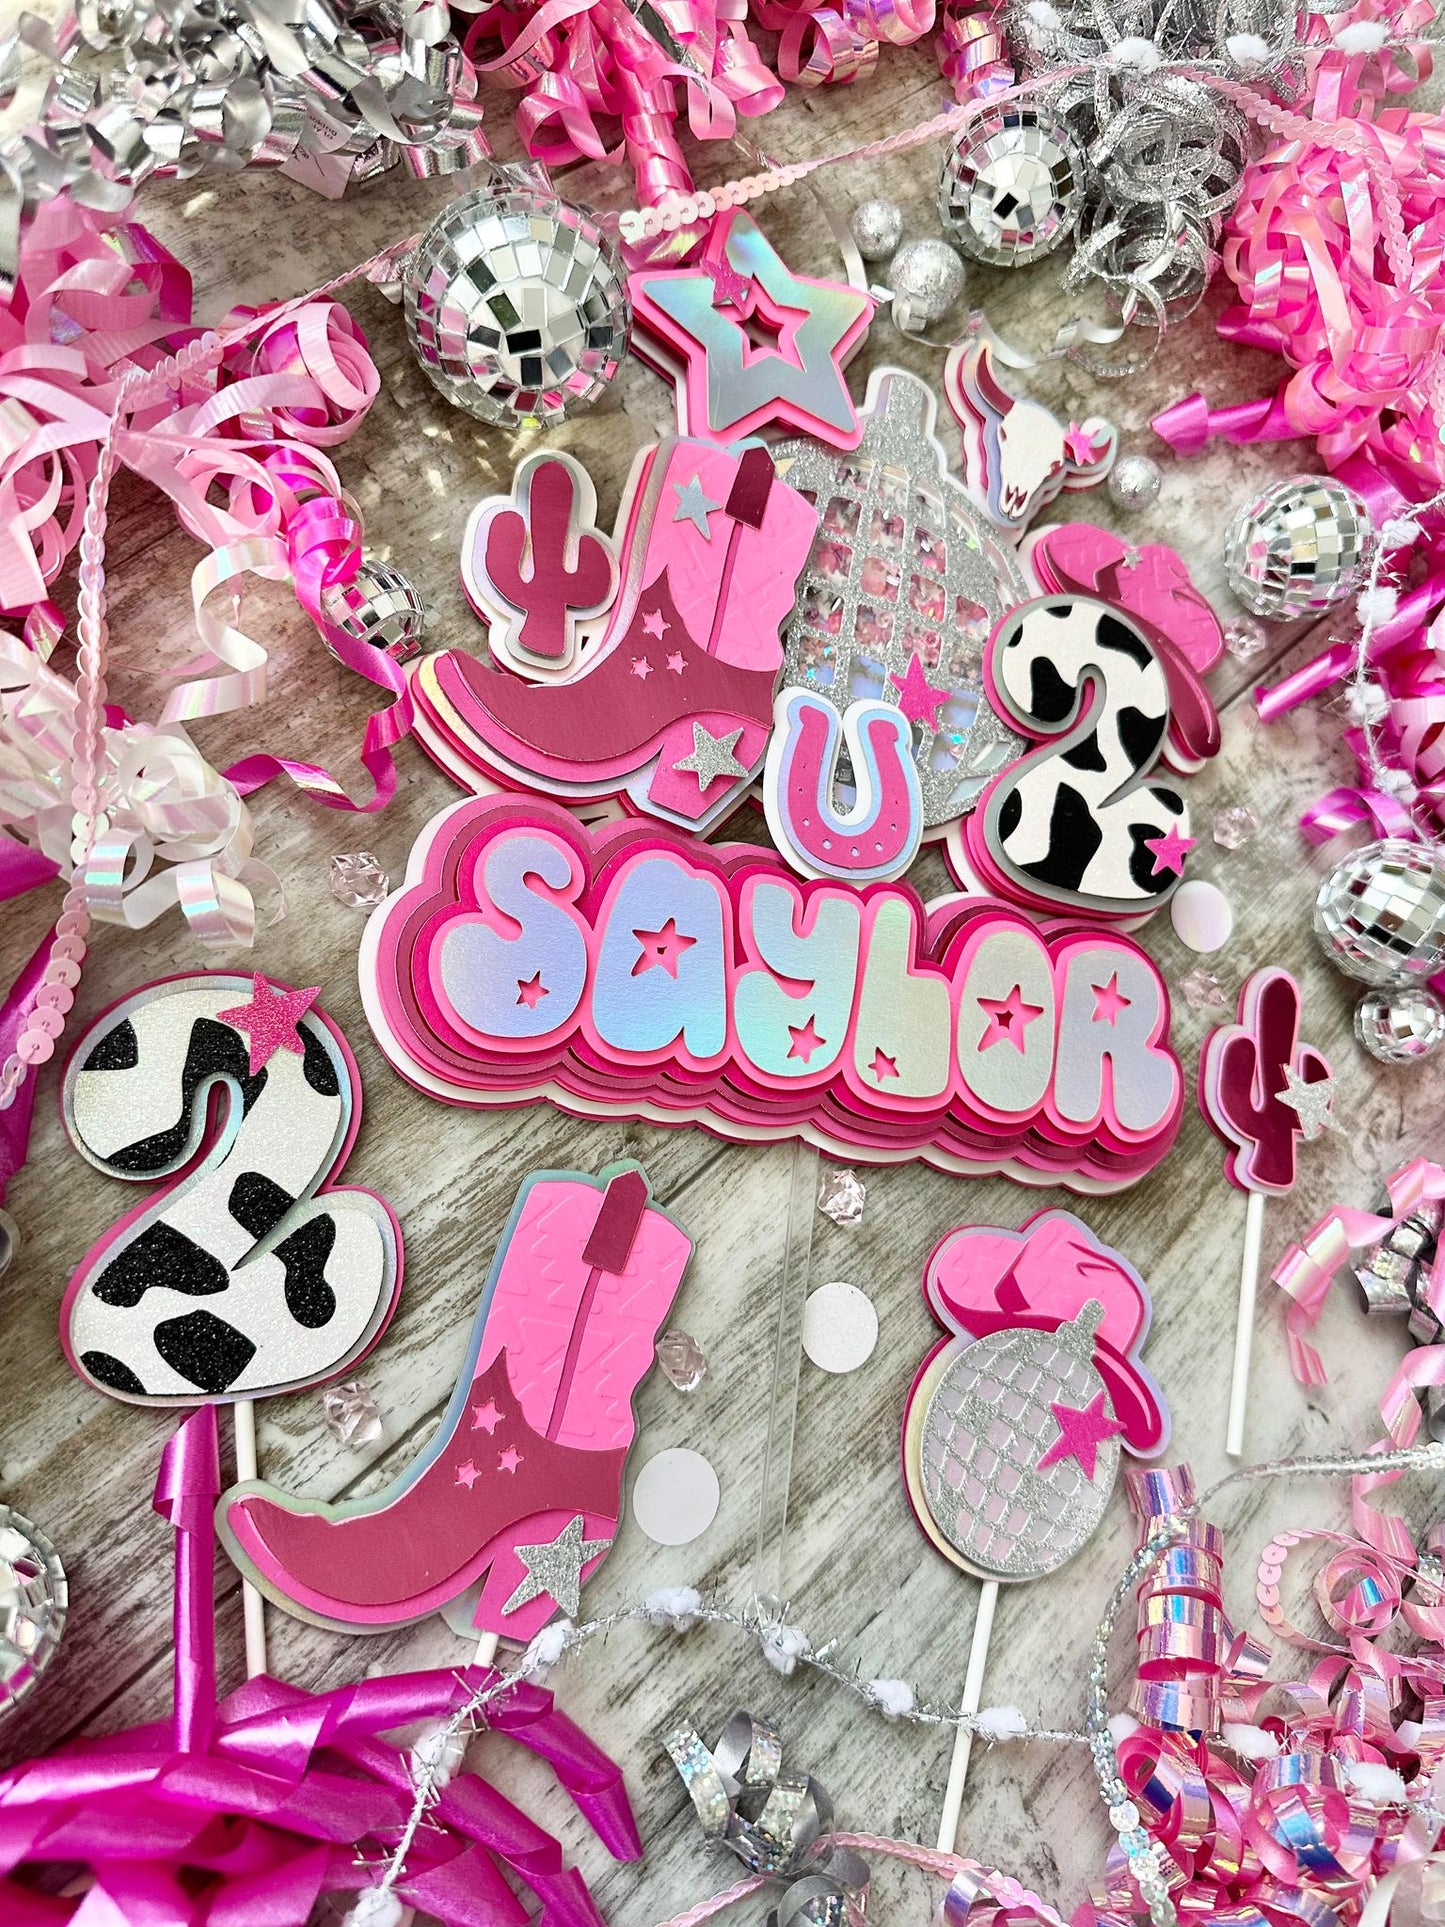 Let's Go Girls Space Cowgirl Disco Cow Girl Silver Pink Boot Cow Horseshoe Glitter Shaker Cake Topper